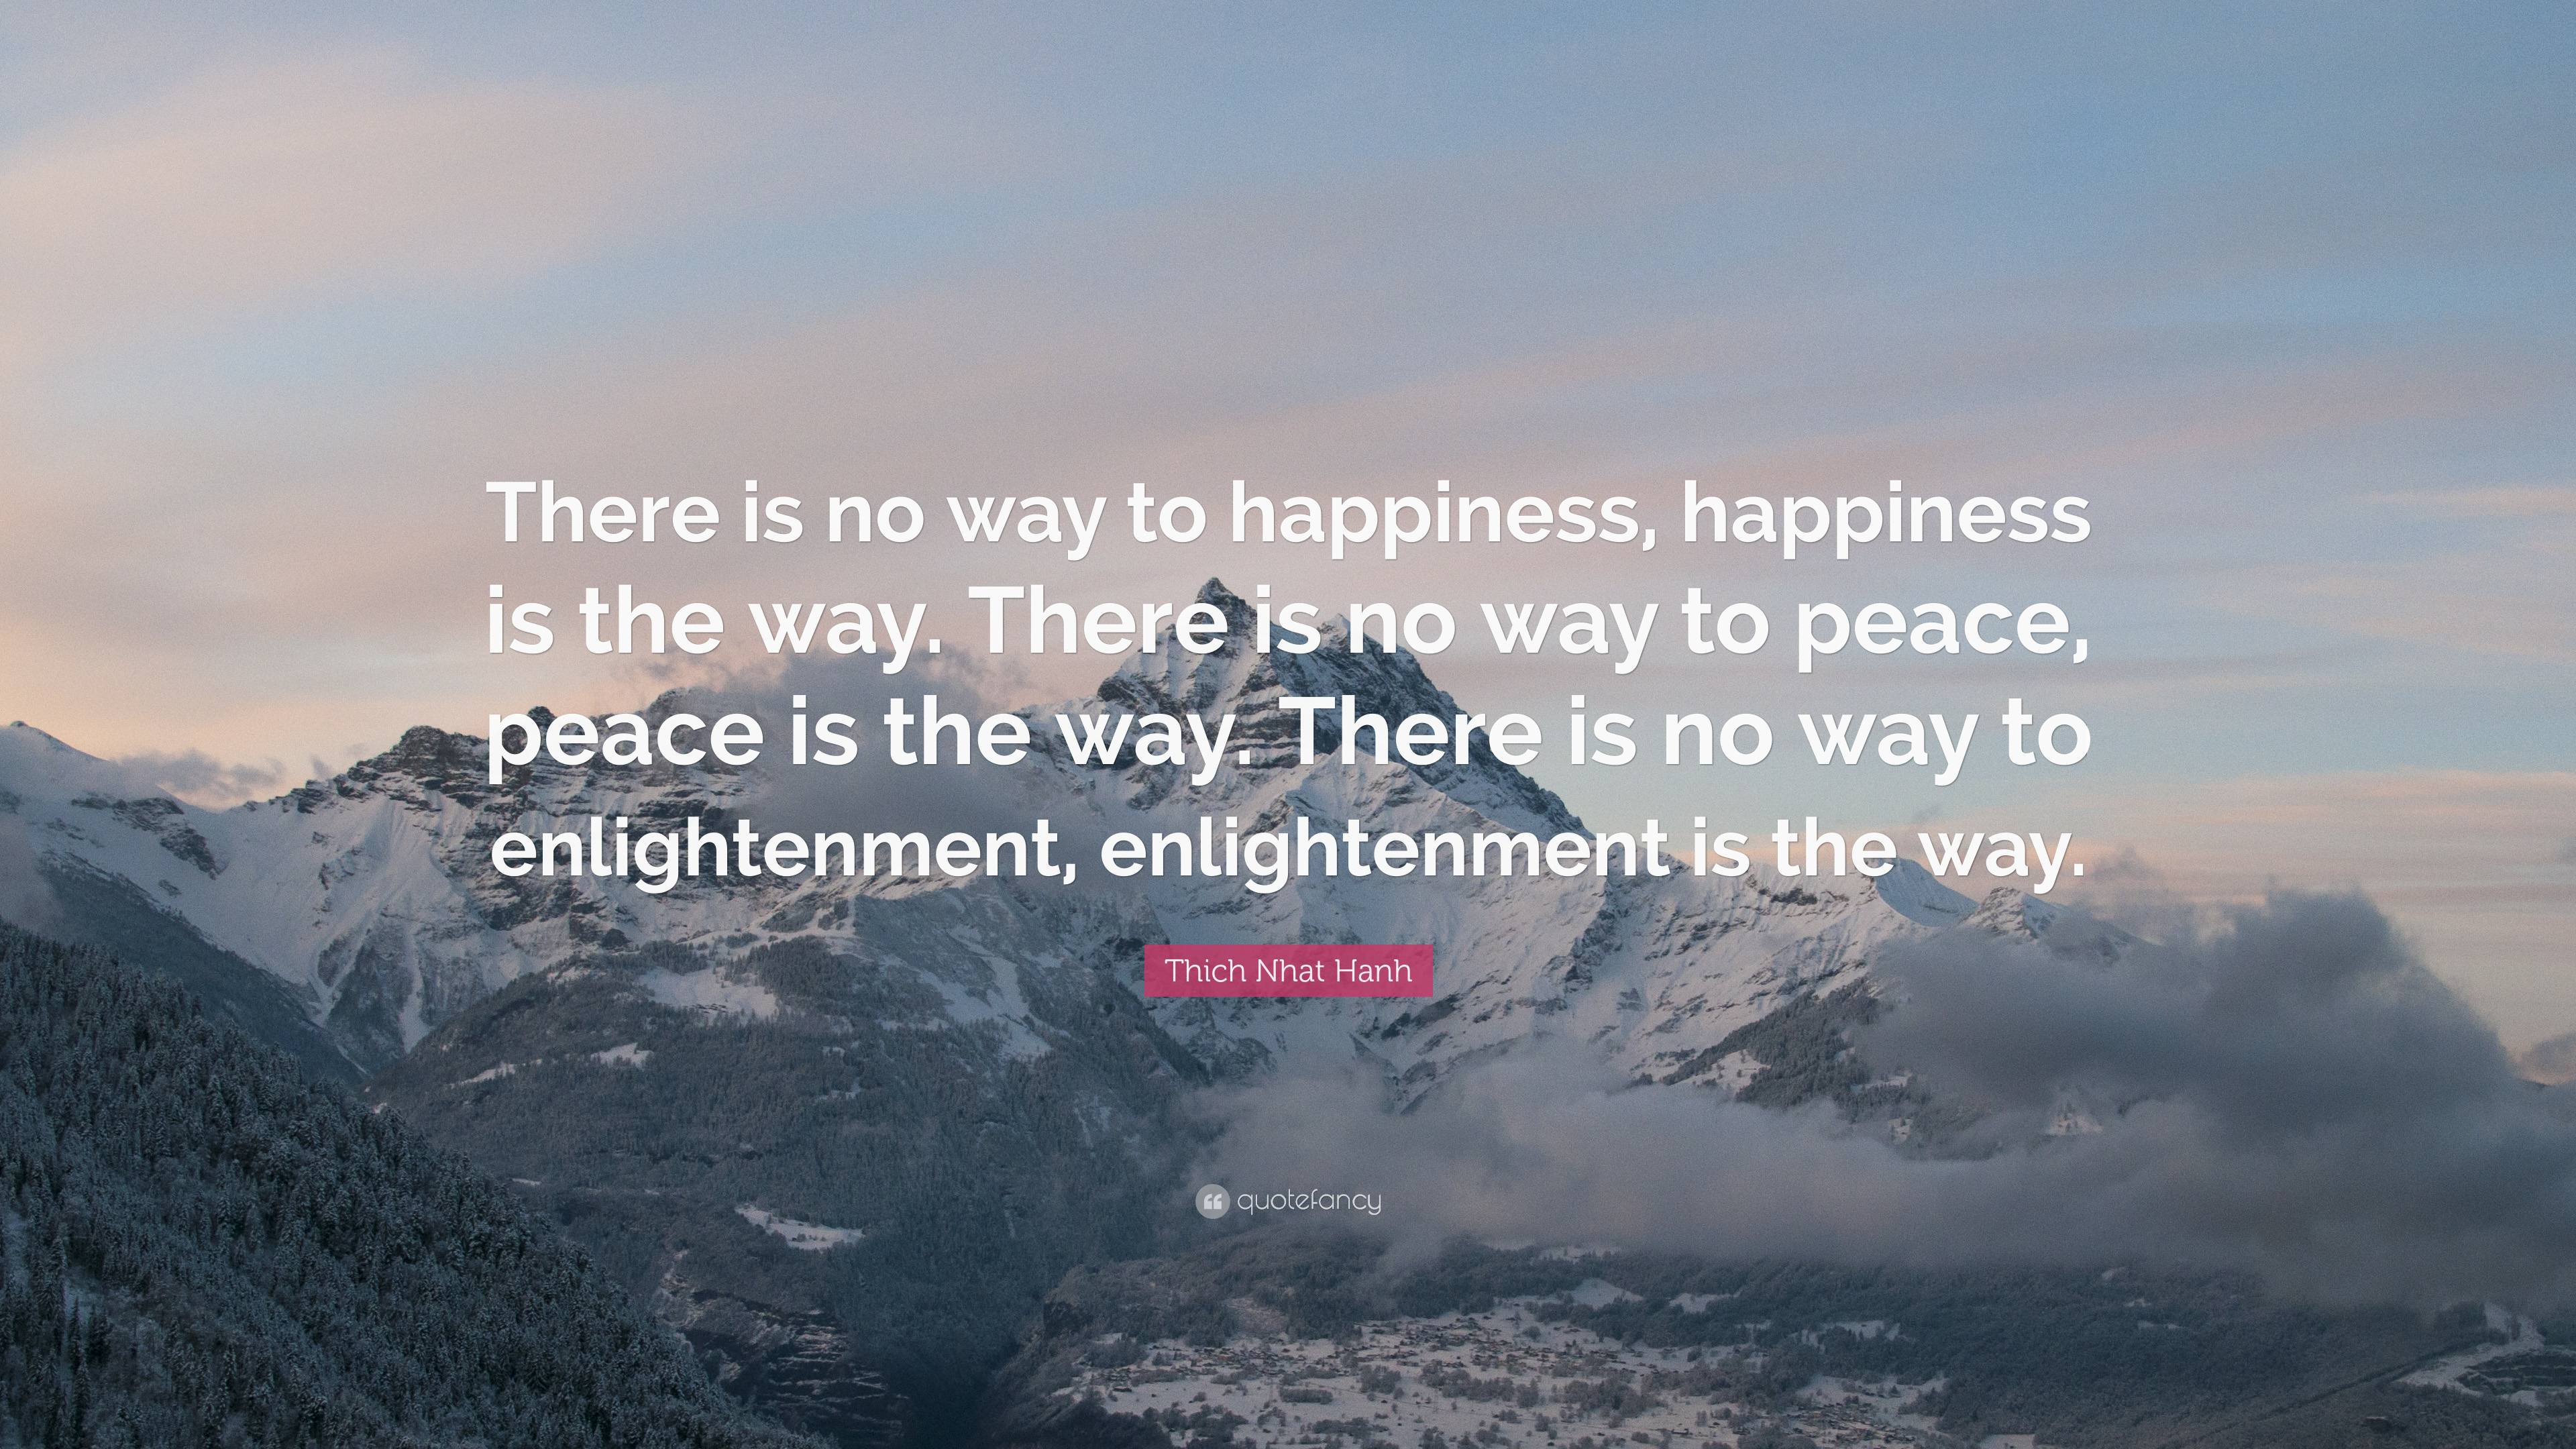 Thich Nhat Hanh Quote: “There is no way to happiness, happiness is the ...